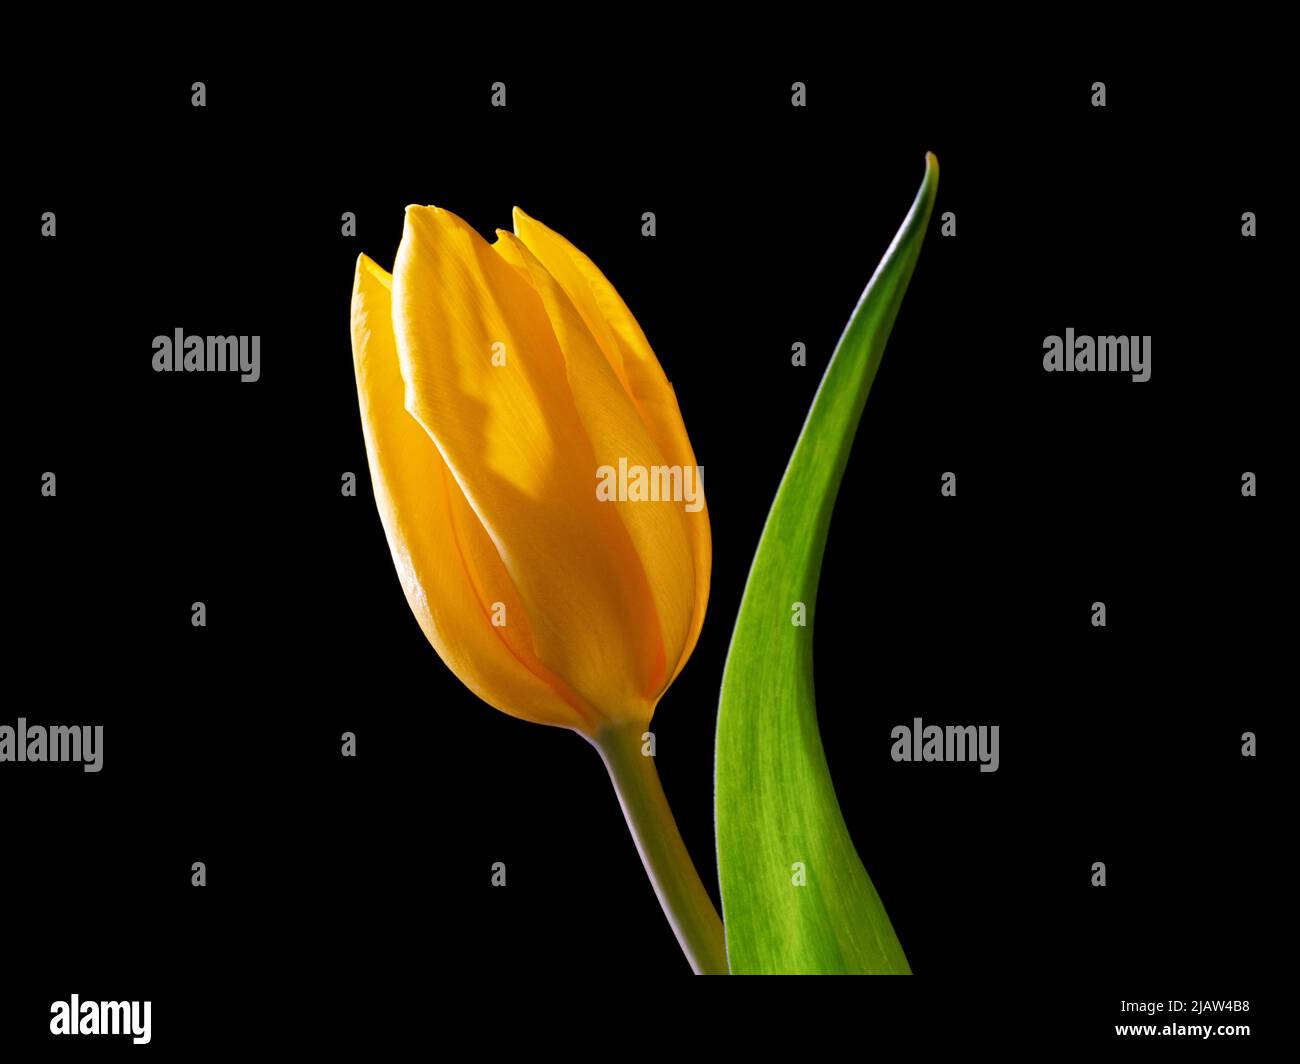 Yellow tulip flower with green leaf close up isolated on black background Stock Photo